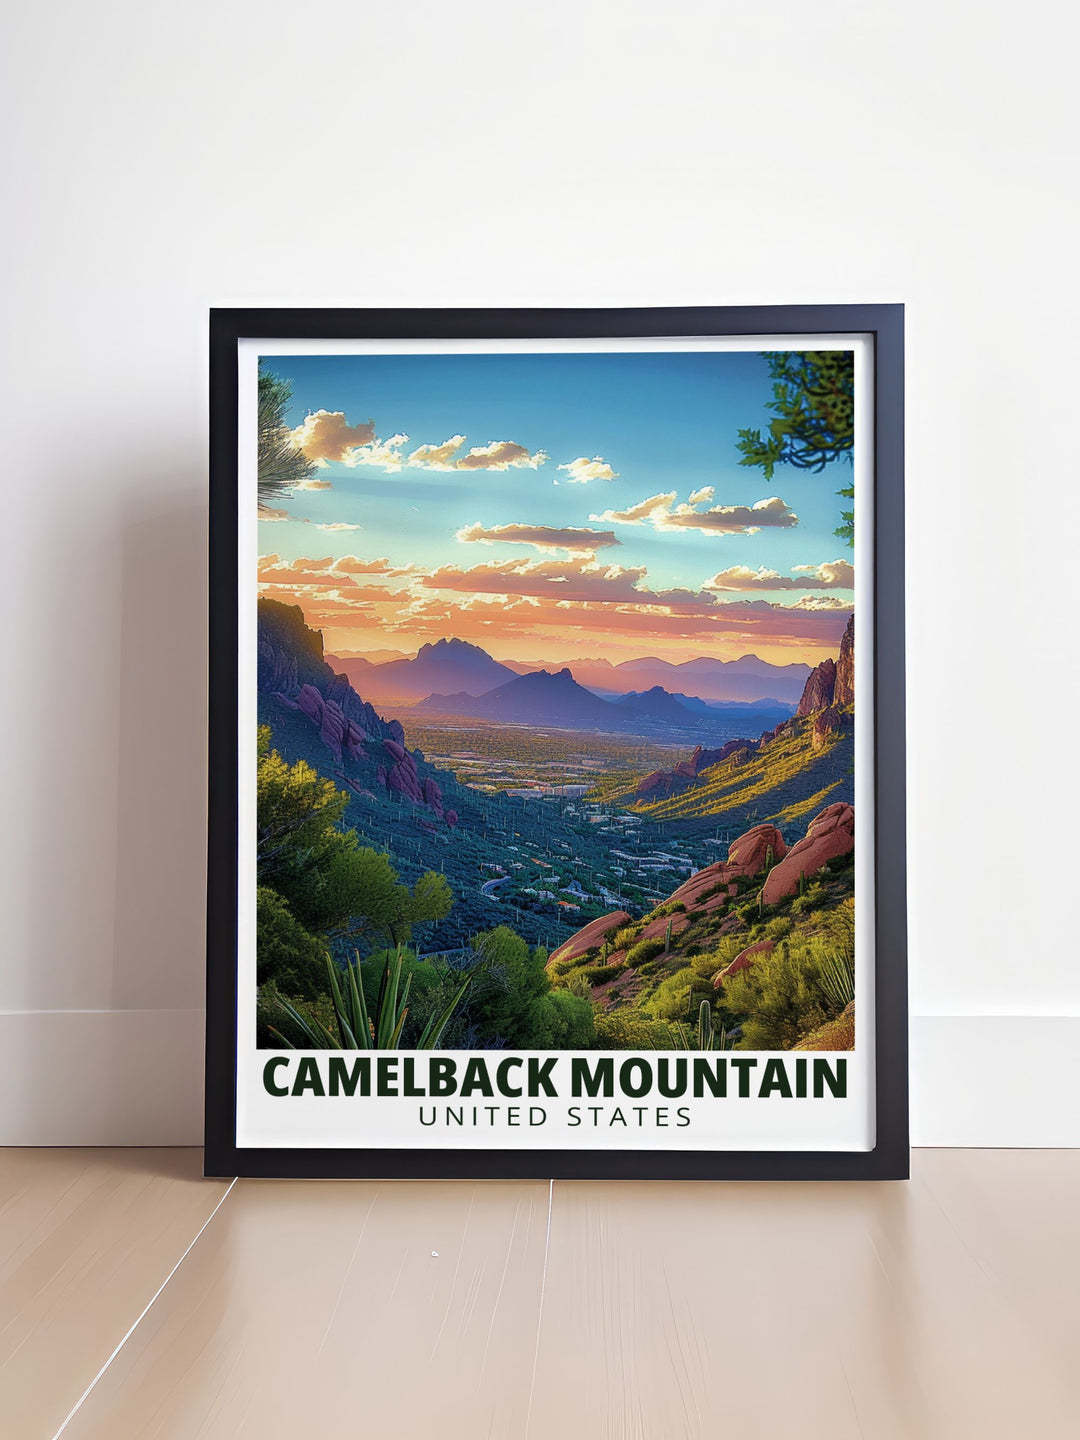 This Echo Canyon Trail home decor piece features a beautifully detailed Arizona travel print perfect for nature lovers. The artwork highlights the scenic views of Mt. Camelback making it an excellent addition to any room or a thoughtful travel gift.